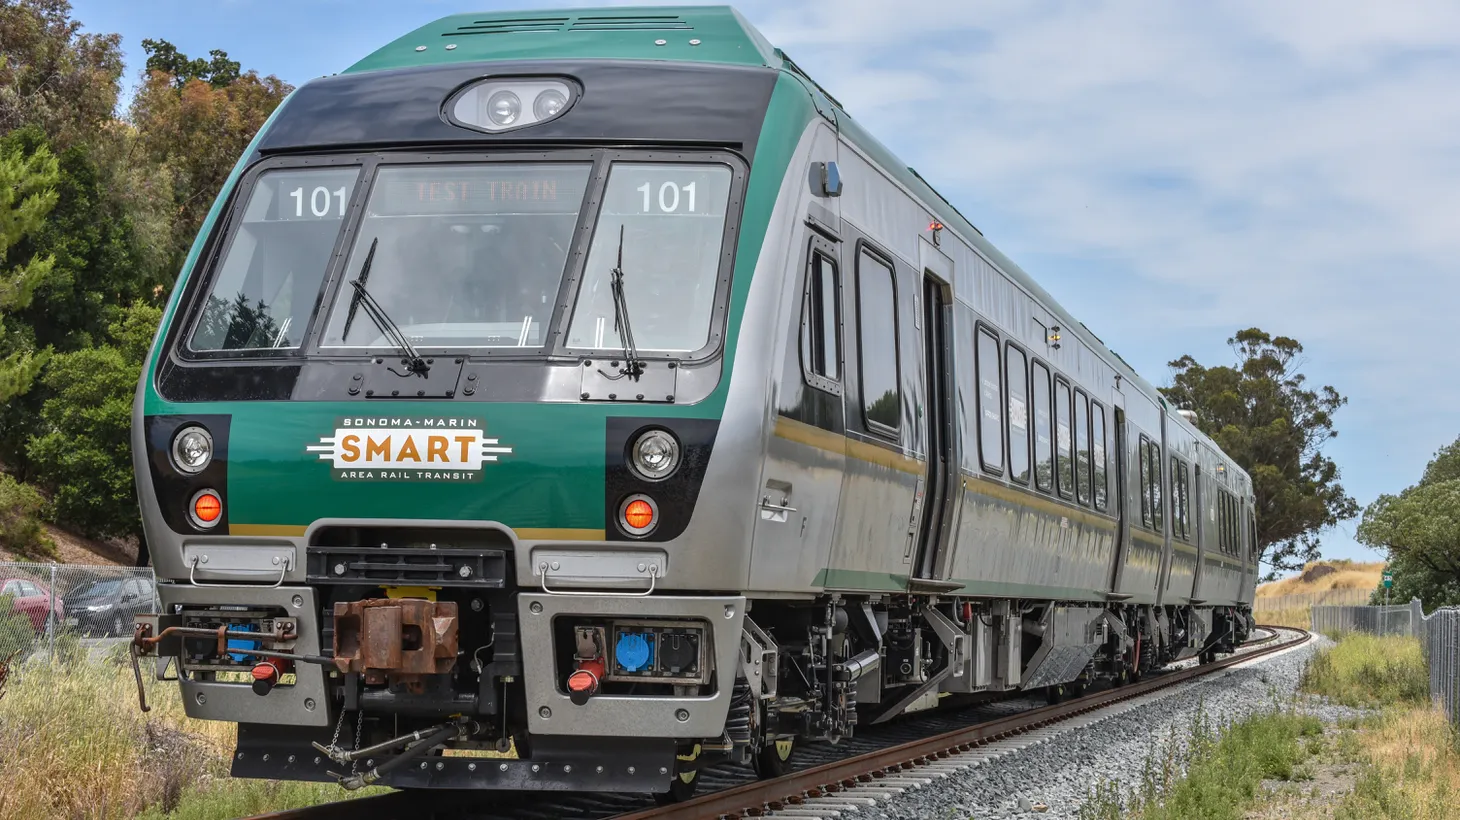 Once he found it, commentator Joe Mathews was sold on the $400 million SMART train, which connects with the Golden Gate Ferry and serves riders in Marin and Sonoma counties.